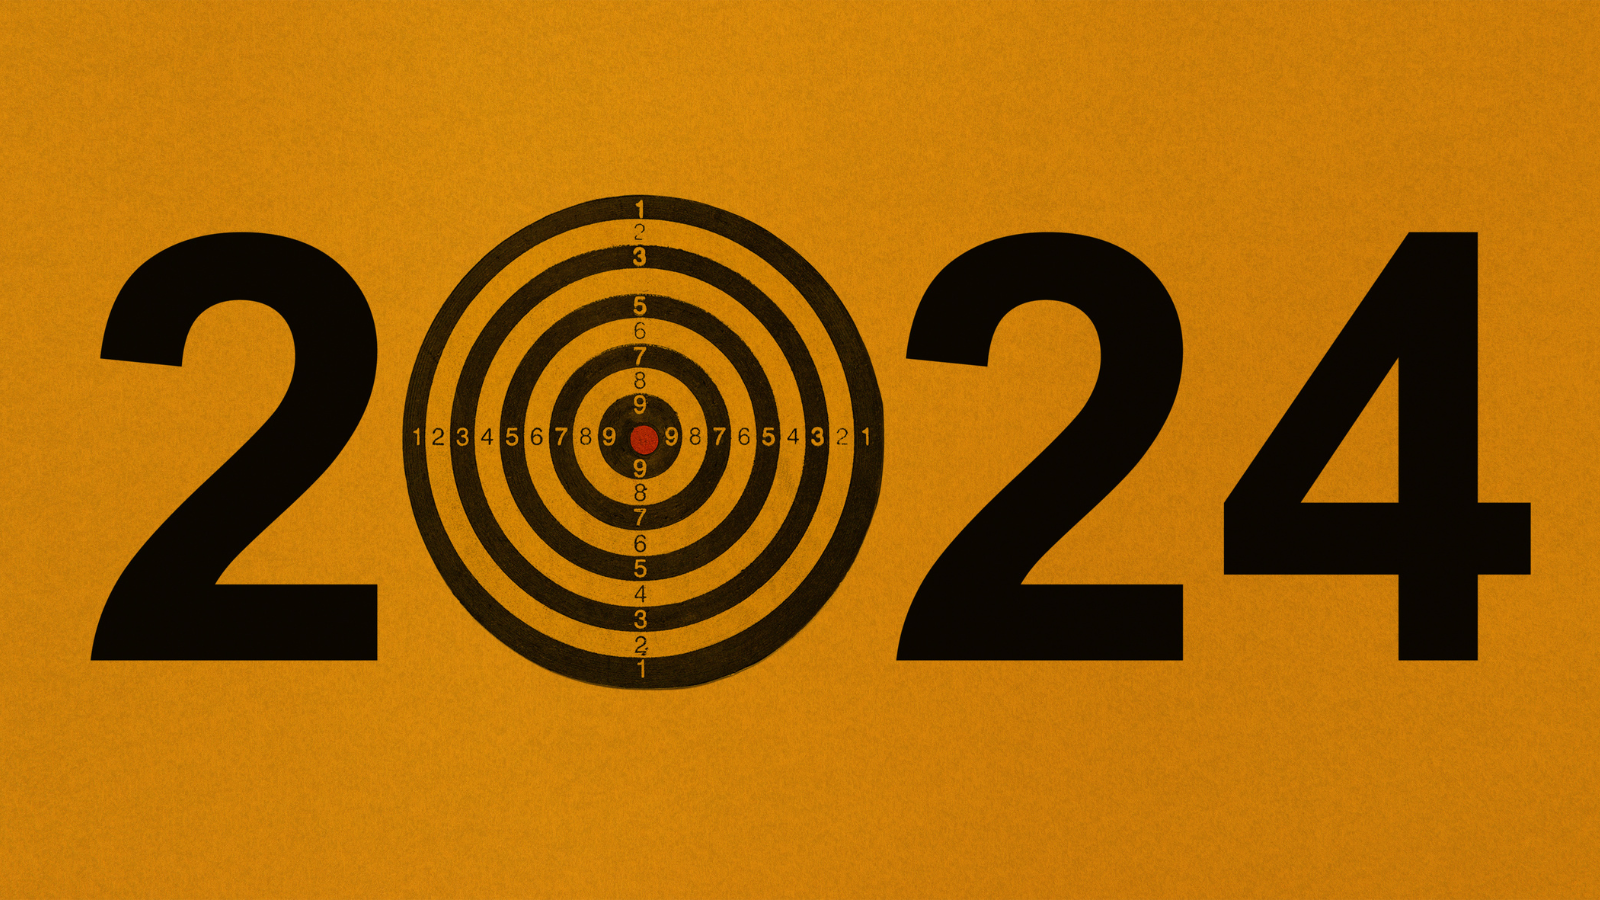 2024 in black with a target as the 0 on an orange background